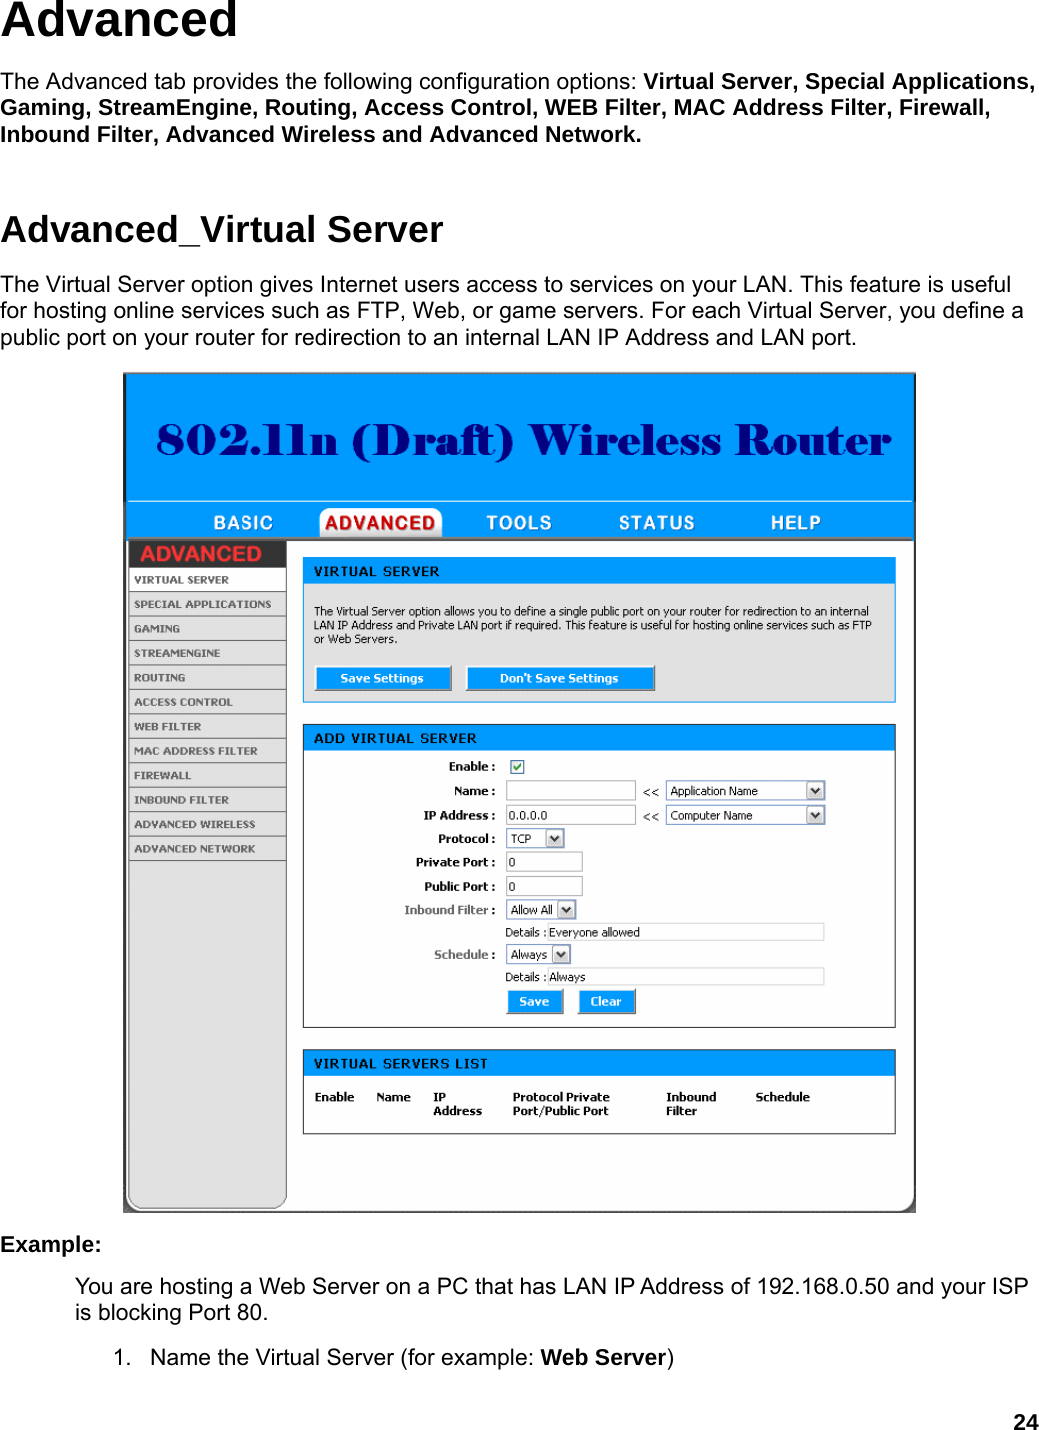 24 Advanced The Advanced tab provides the following configuration options: Virtual Server, Special Applications, Gaming, StreamEngine, Routing, Access Control, WEB Filter, MAC Address Filter, Firewall, Inbound Filter, Advanced Wireless and Advanced Network.   Advanced_Virtual Server The Virtual Server option gives Internet users access to services on your LAN. This feature is useful for hosting online services such as FTP, Web, or game servers. For each Virtual Server, you define a public port on your router for redirection to an internal LAN IP Address and LAN port.    Example:  You are hosting a Web Server on a PC that has LAN IP Address of 192.168.0.50 and your ISP is blocking Port 80.   1.  Name the Virtual Server (for example: Web Server)  